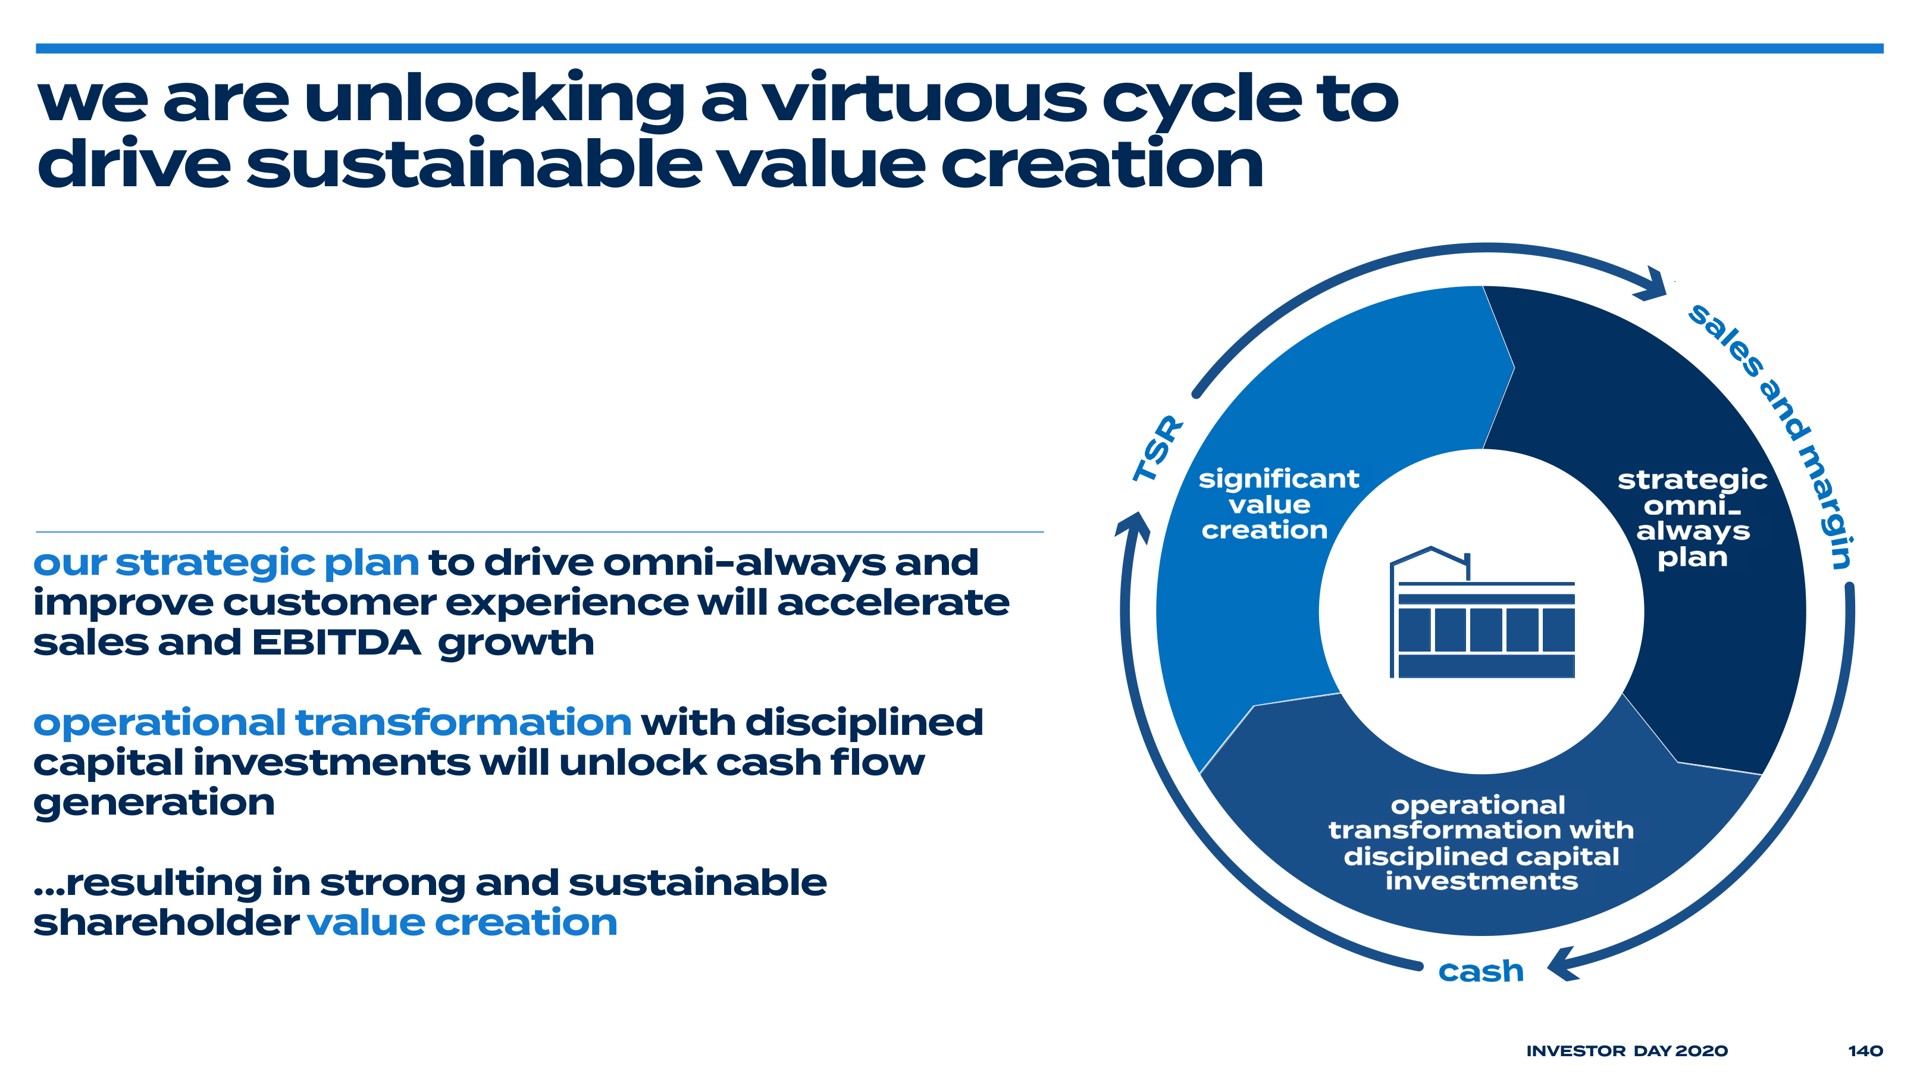 we are unlocking a virtuous cycle to drive sustainable value creation | Bed Bath & Beyond